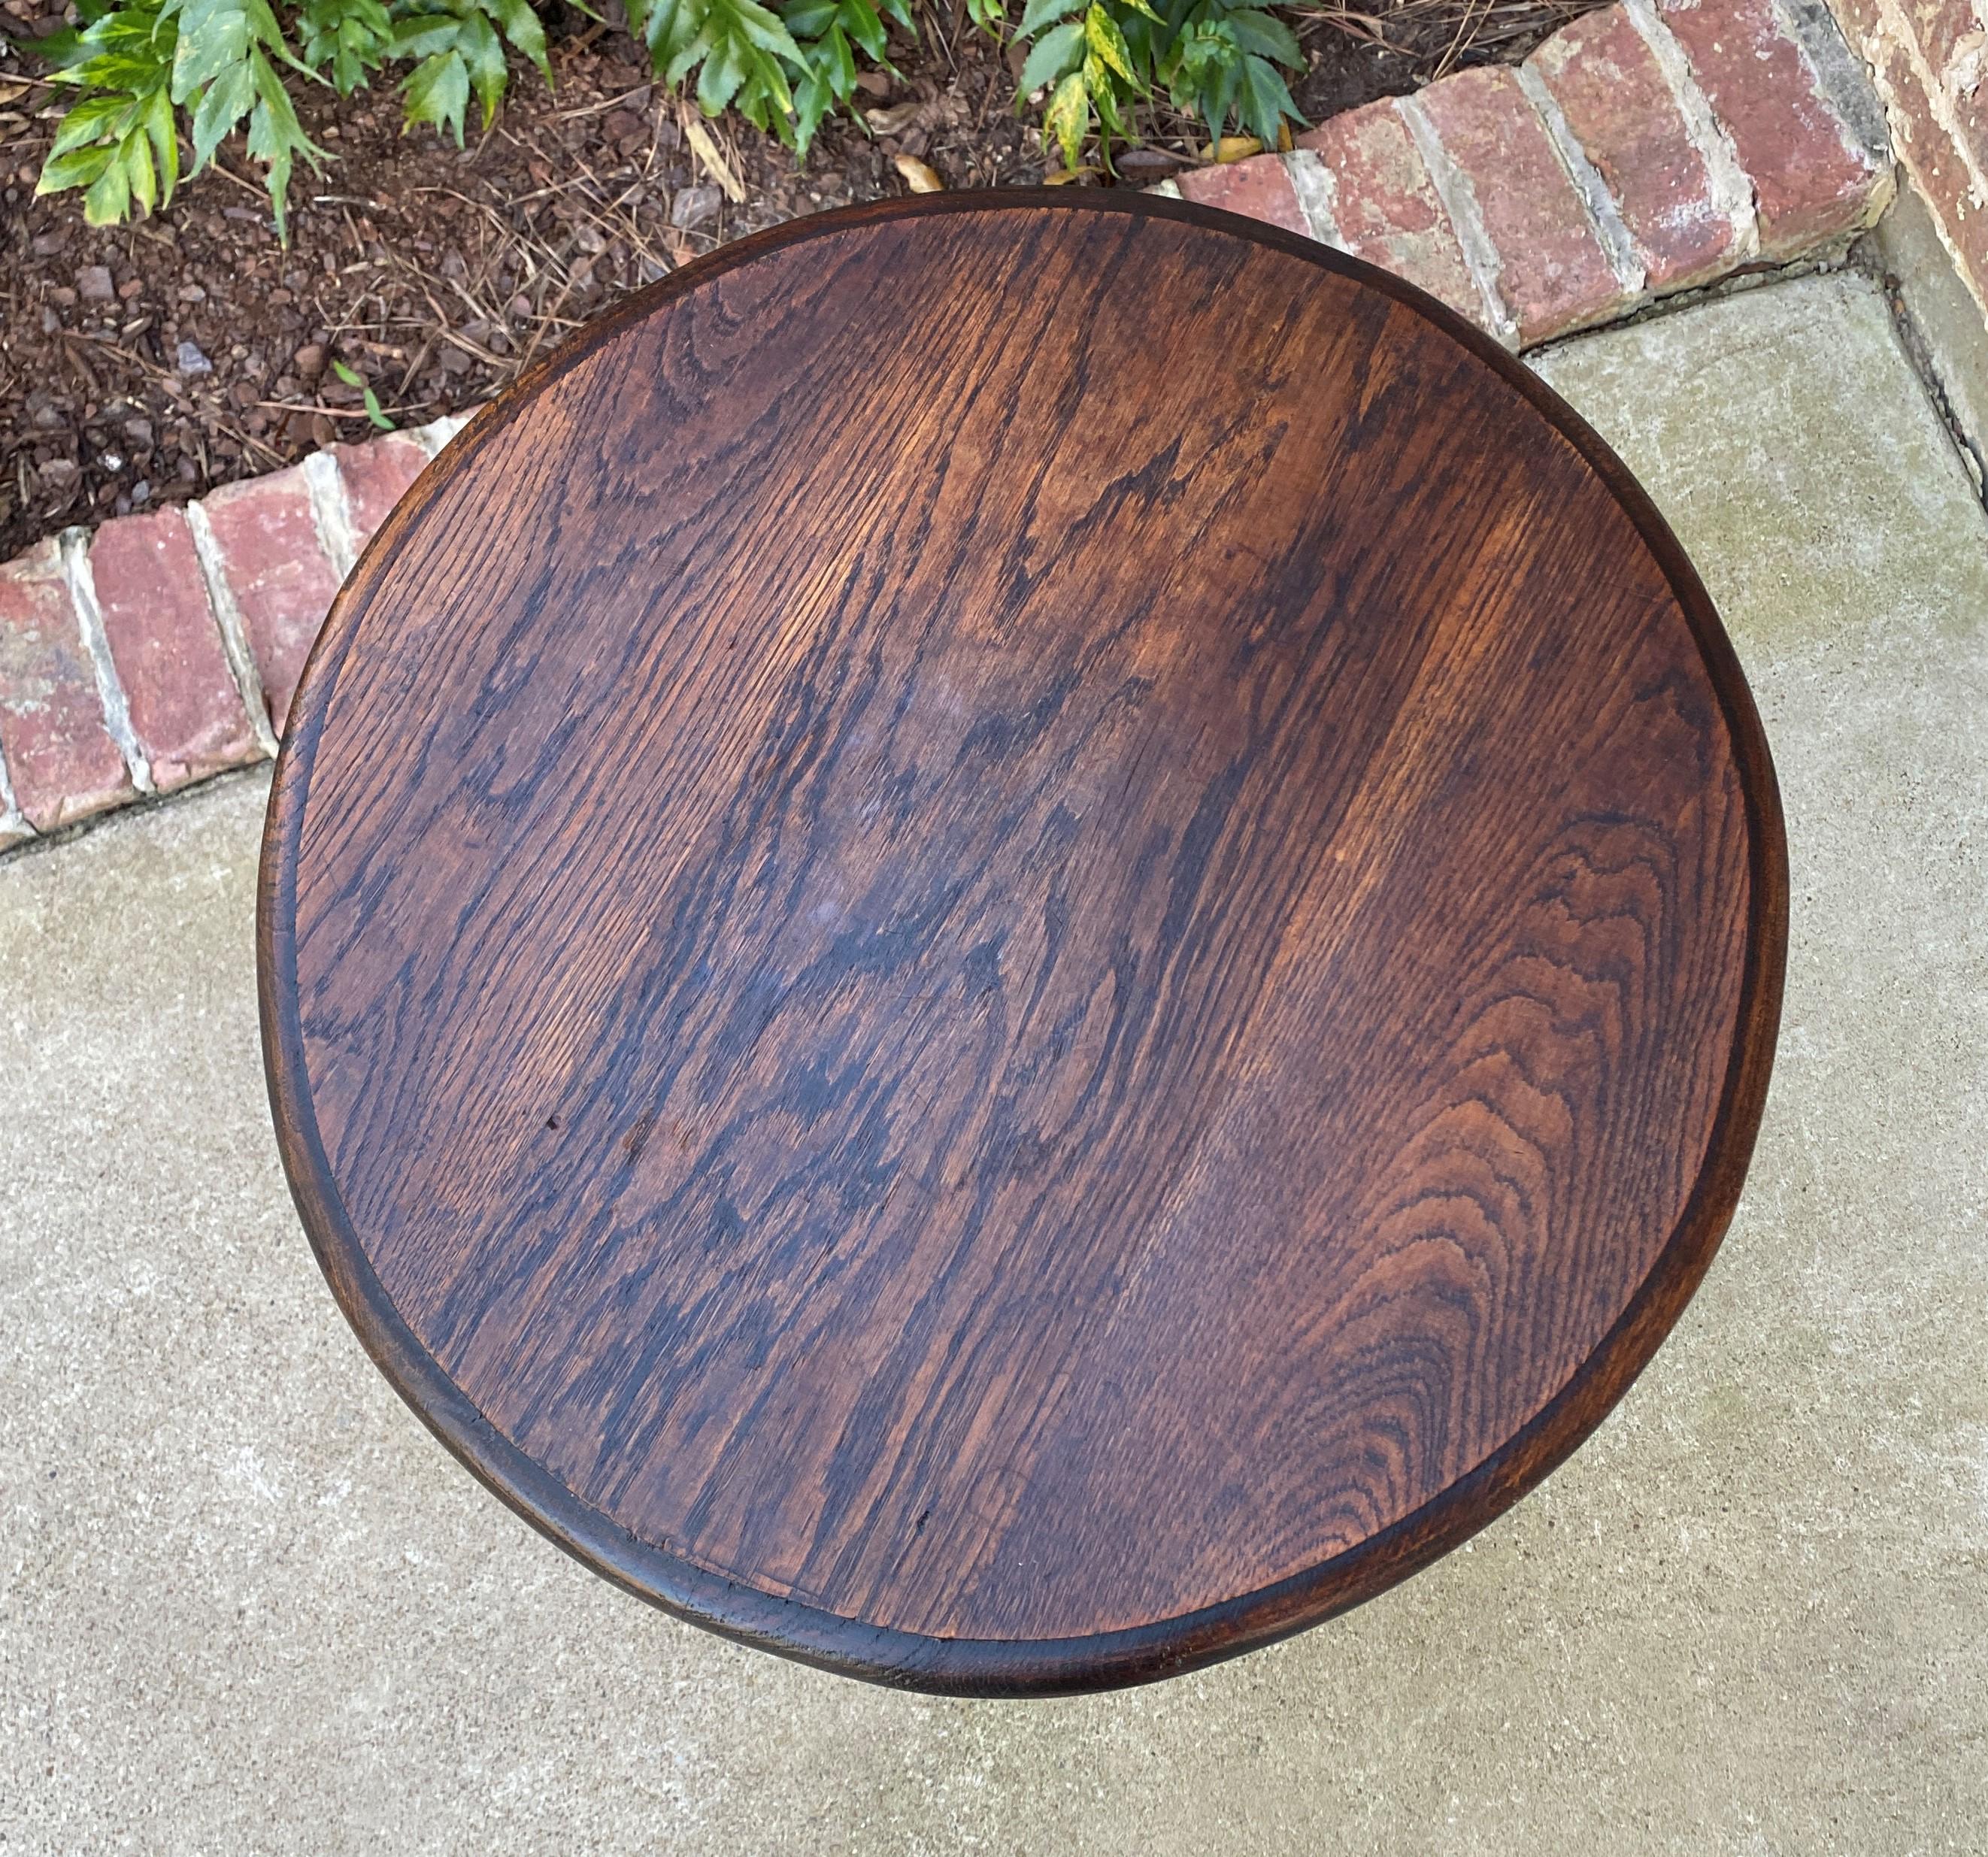 Antique English Round Table End Table Occasional Table Barley Twist Oak 2-Tier 3